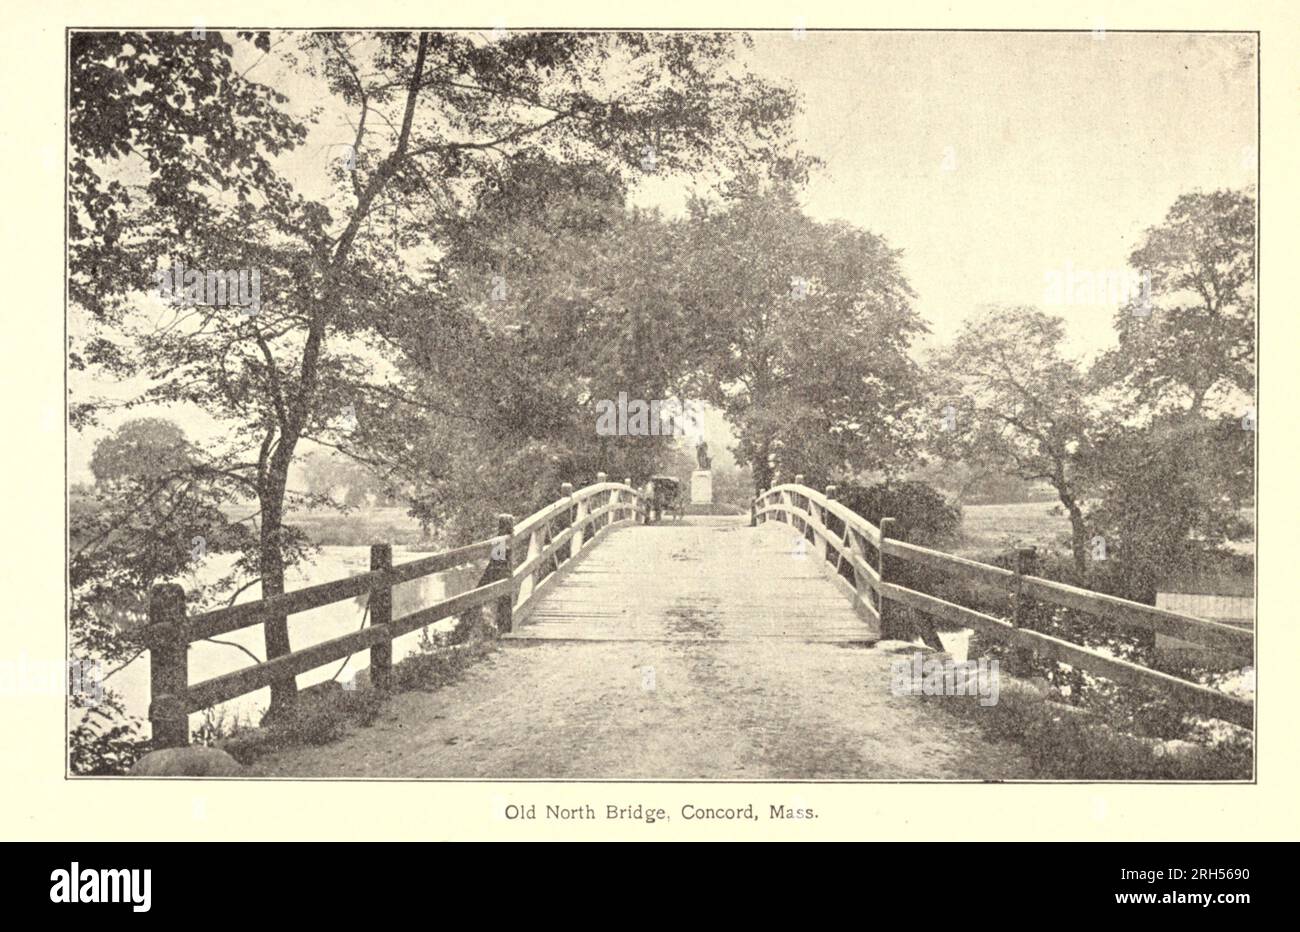 Old North Bridge, Concord, Mass. from the book ' Stage-coach and tavern days ' by Earle, Alice Morse, 1851-1911 The Macmillan Company 1901 Stock Photo